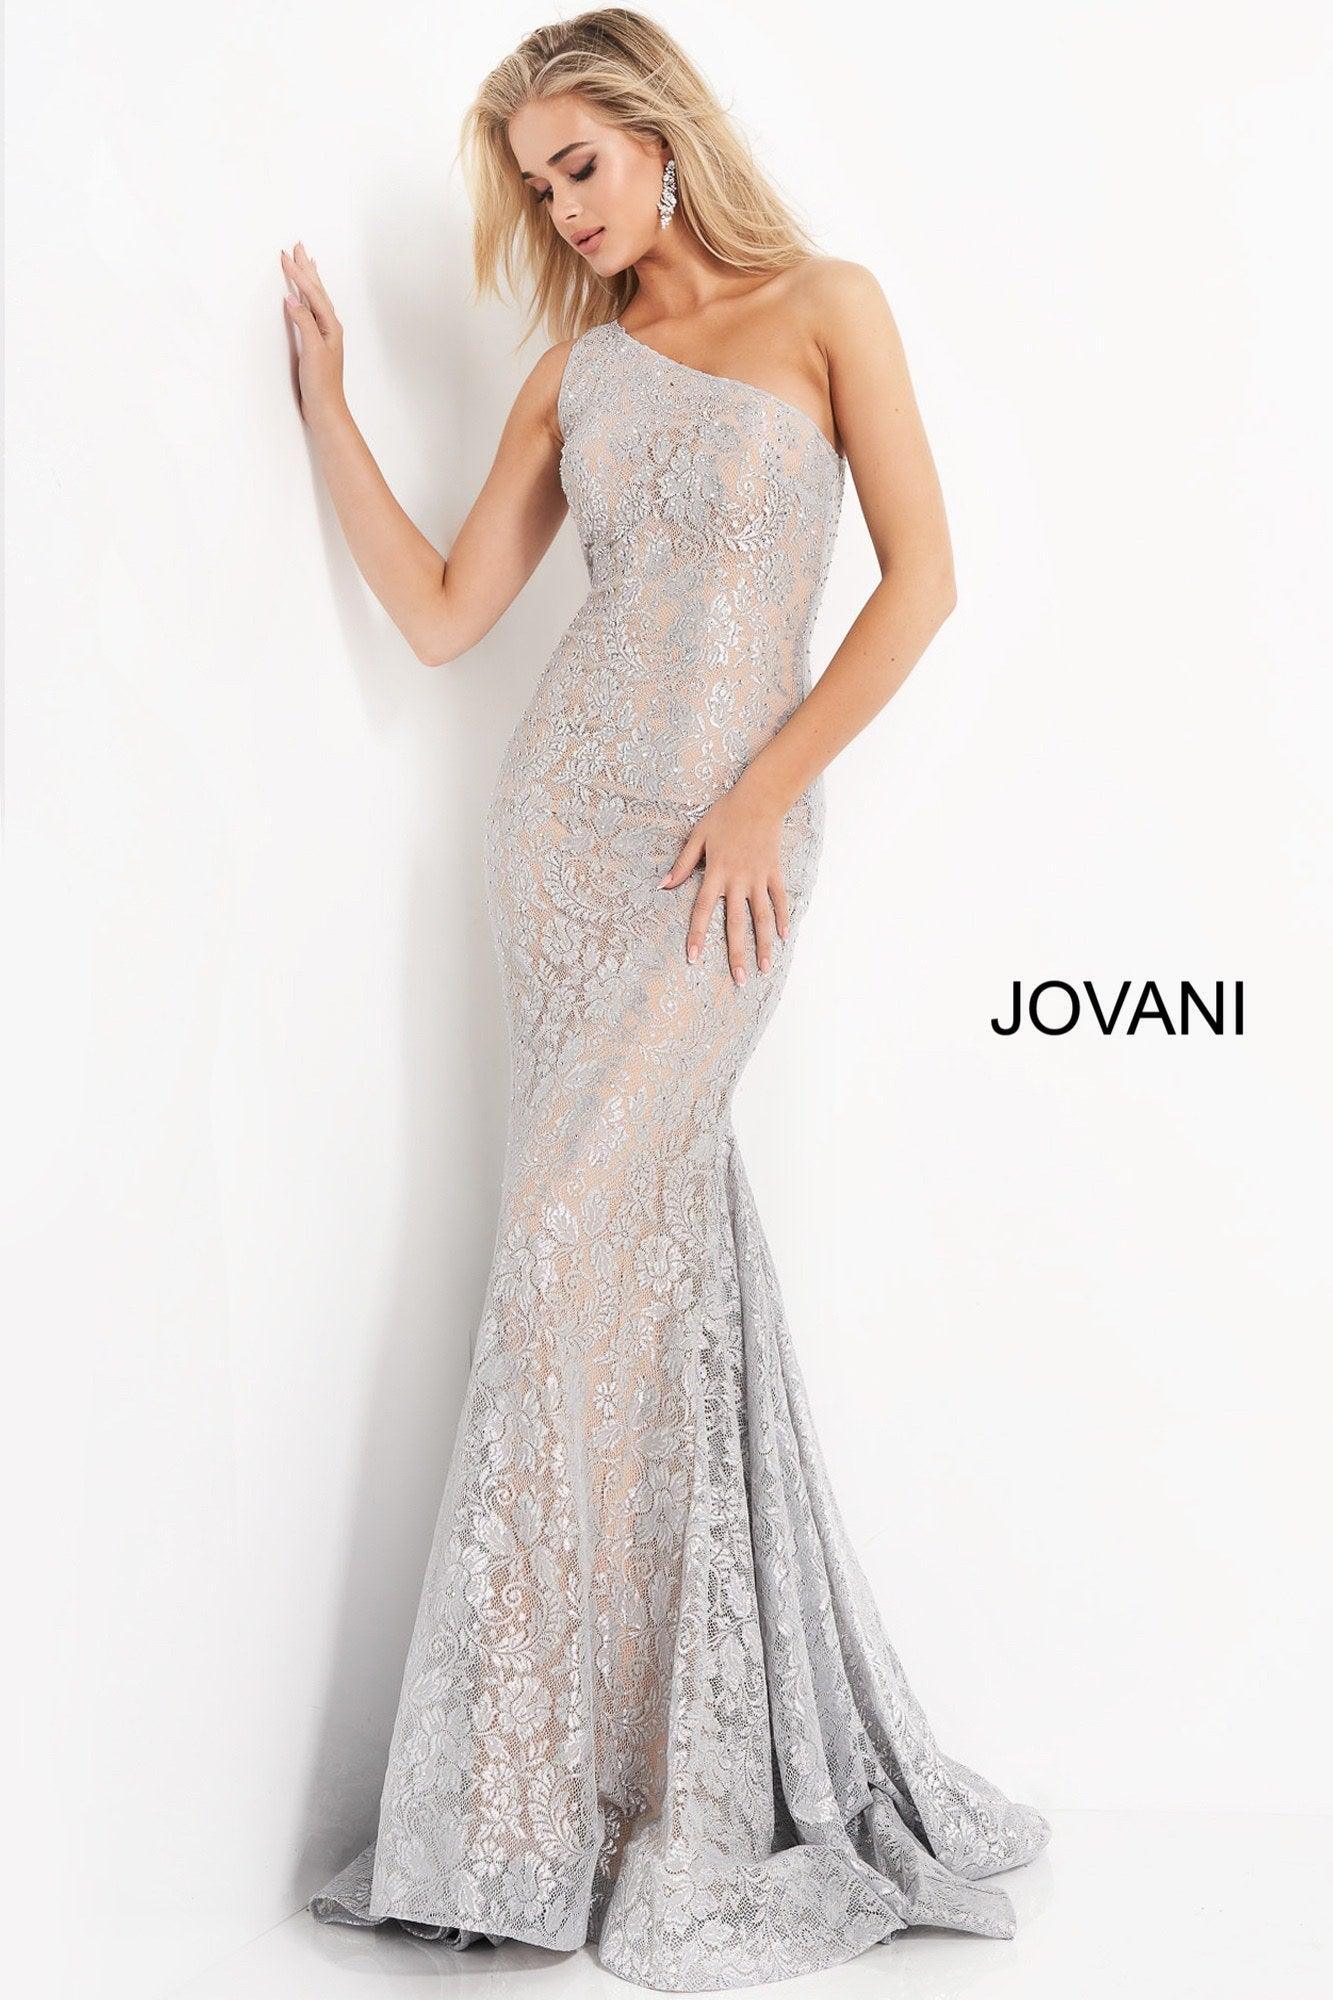 Jovani One Shoulder Long Prom Formal Lace Gown 00353 - The Dress Outlet